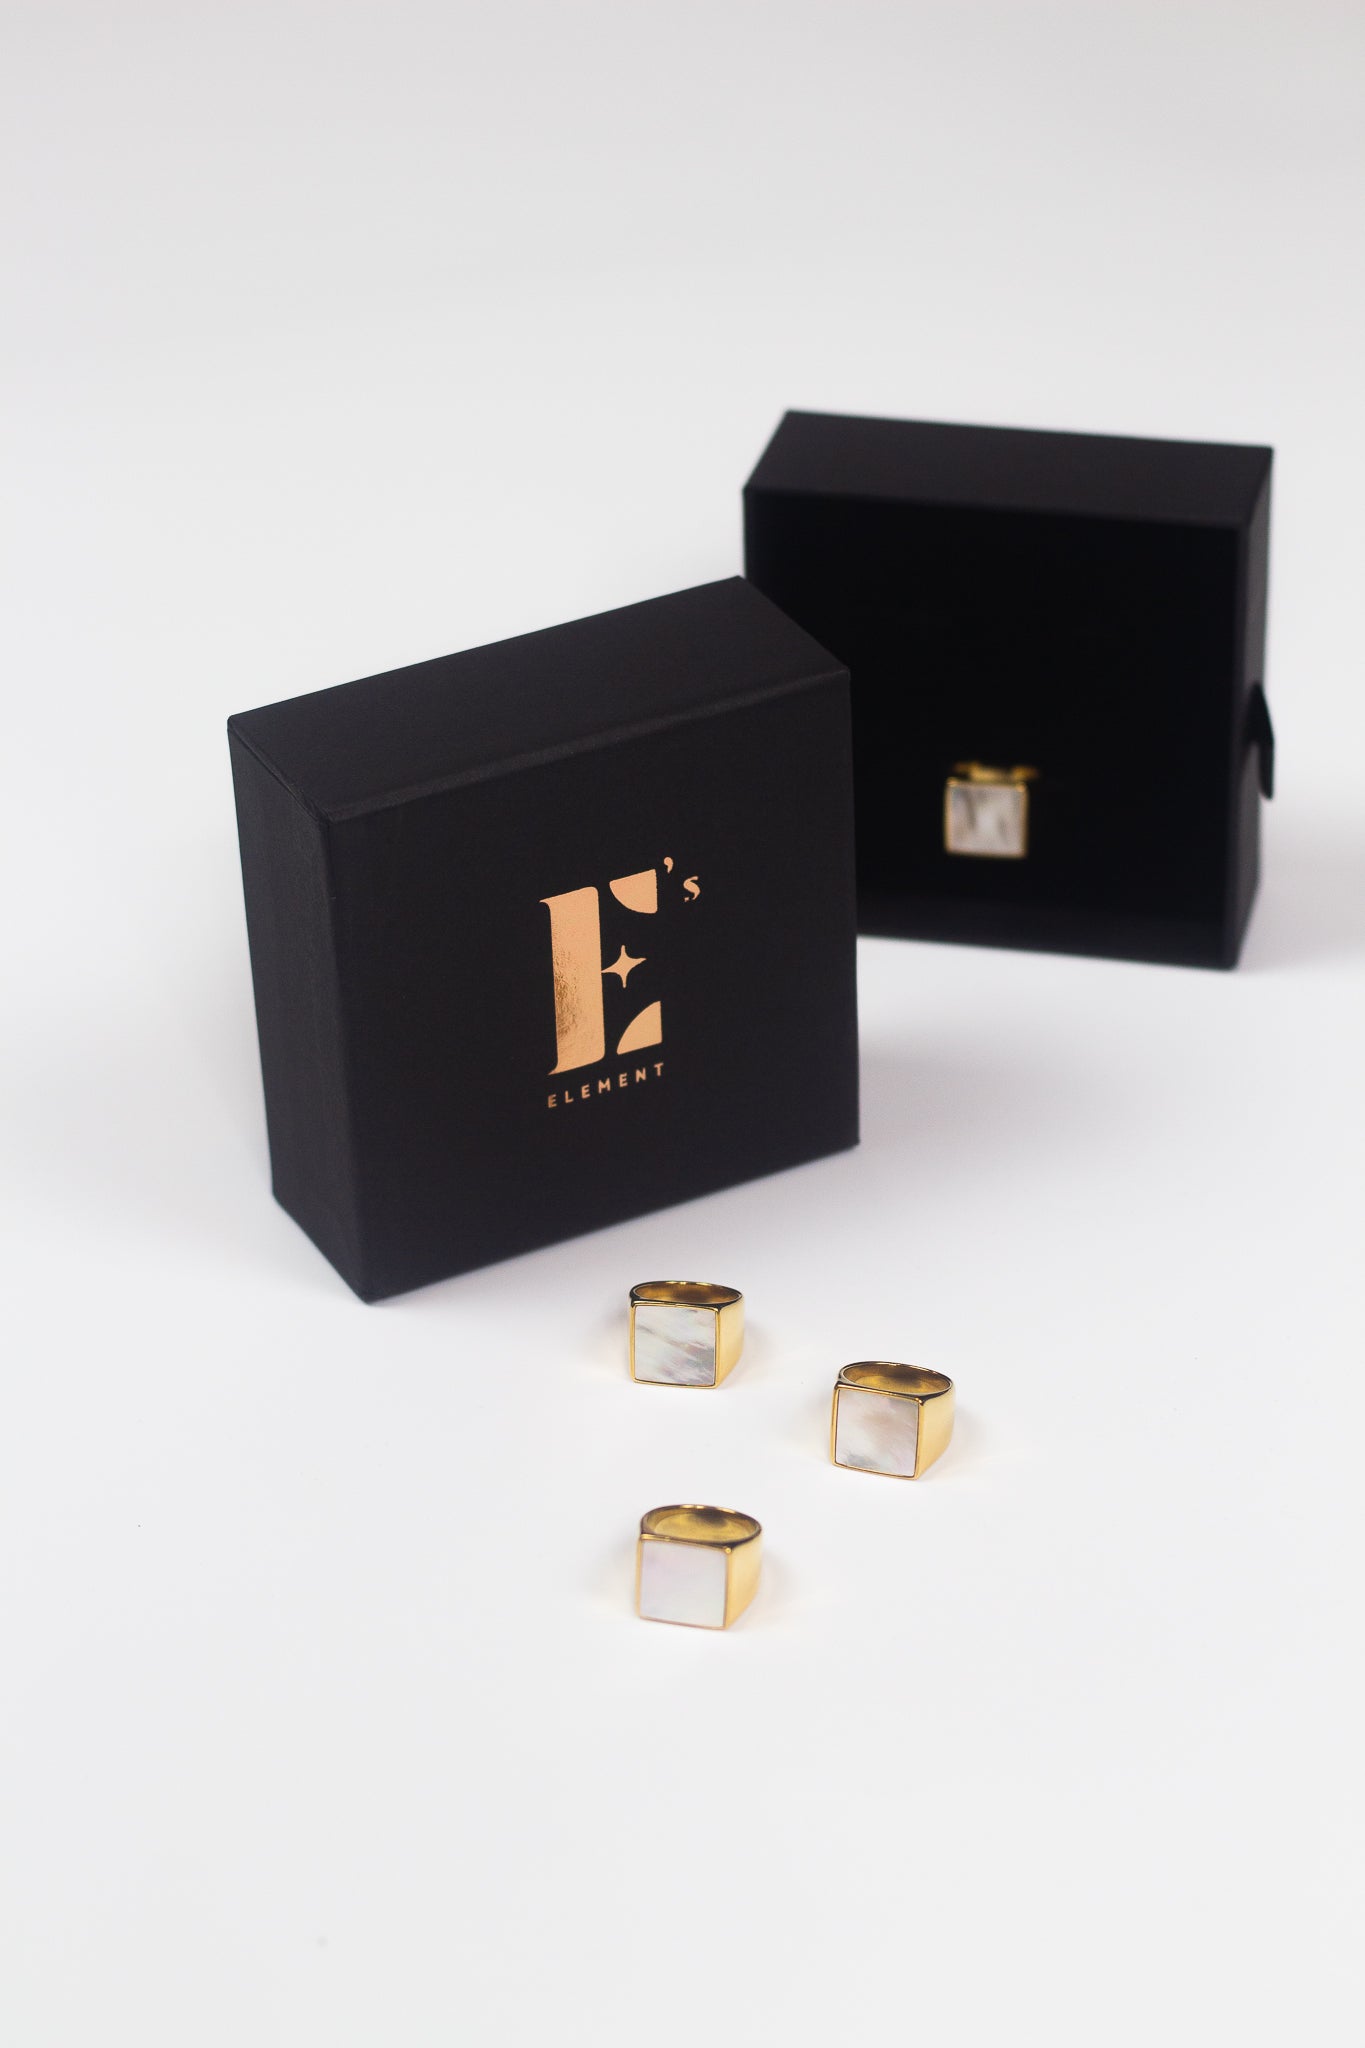 18k gold ring. The ring has a shell attached. Three of the rings are placed in front of a black container with the E's Element logo in gold. Behind the container is an open container with the ring placed inside. Shell Signet Ring by E's Element.